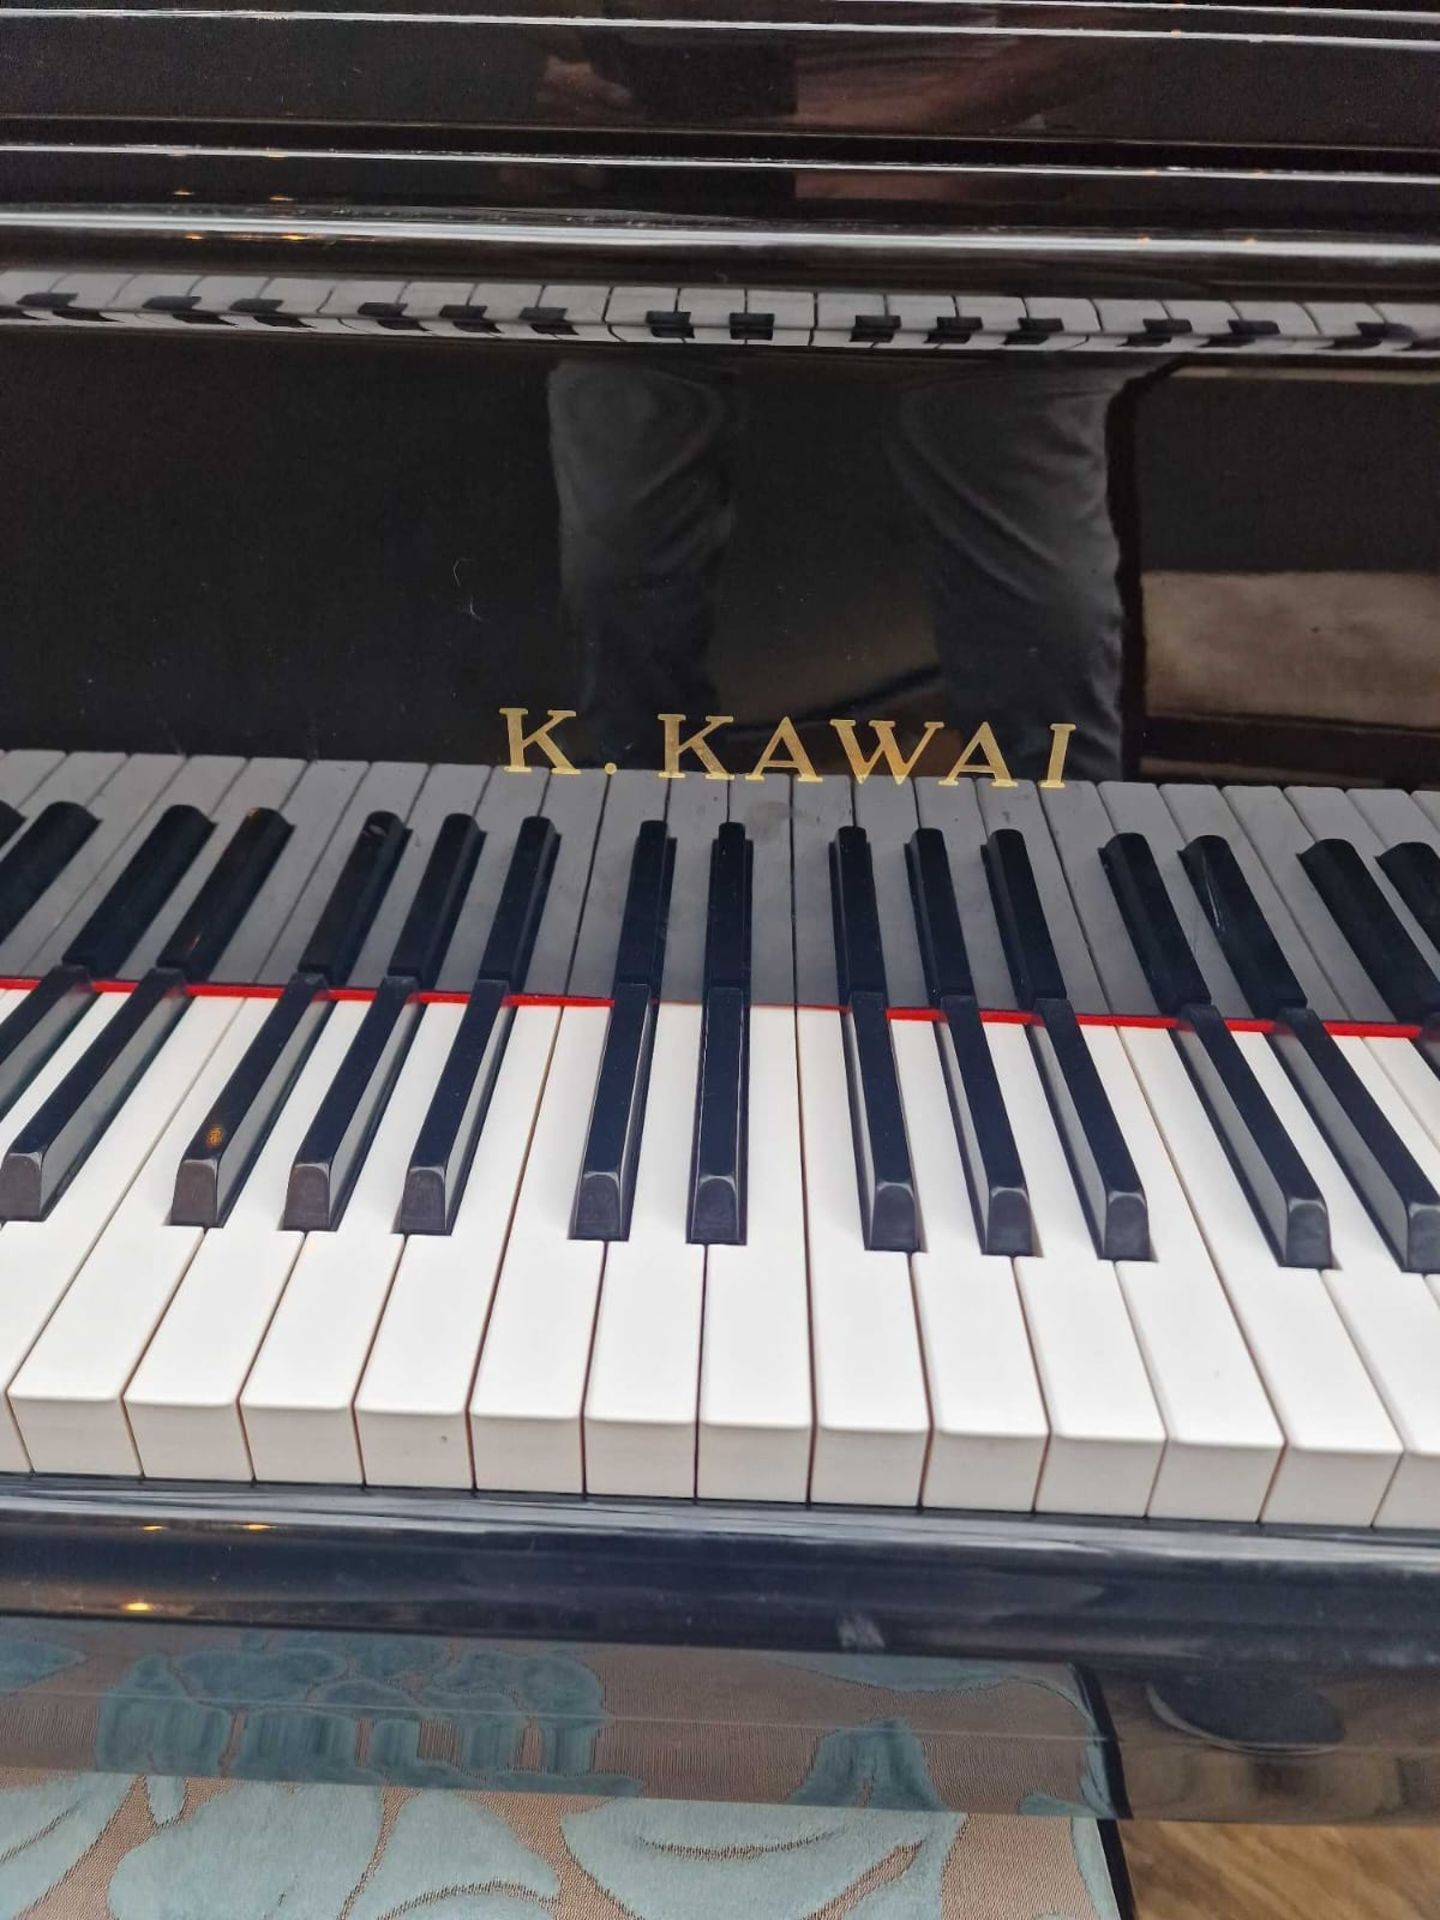 Kawai GM-10K Baby Grand Piano With Its Resonant Tone And Classic Good Looks, The GM-10K Is An - Image 4 of 9